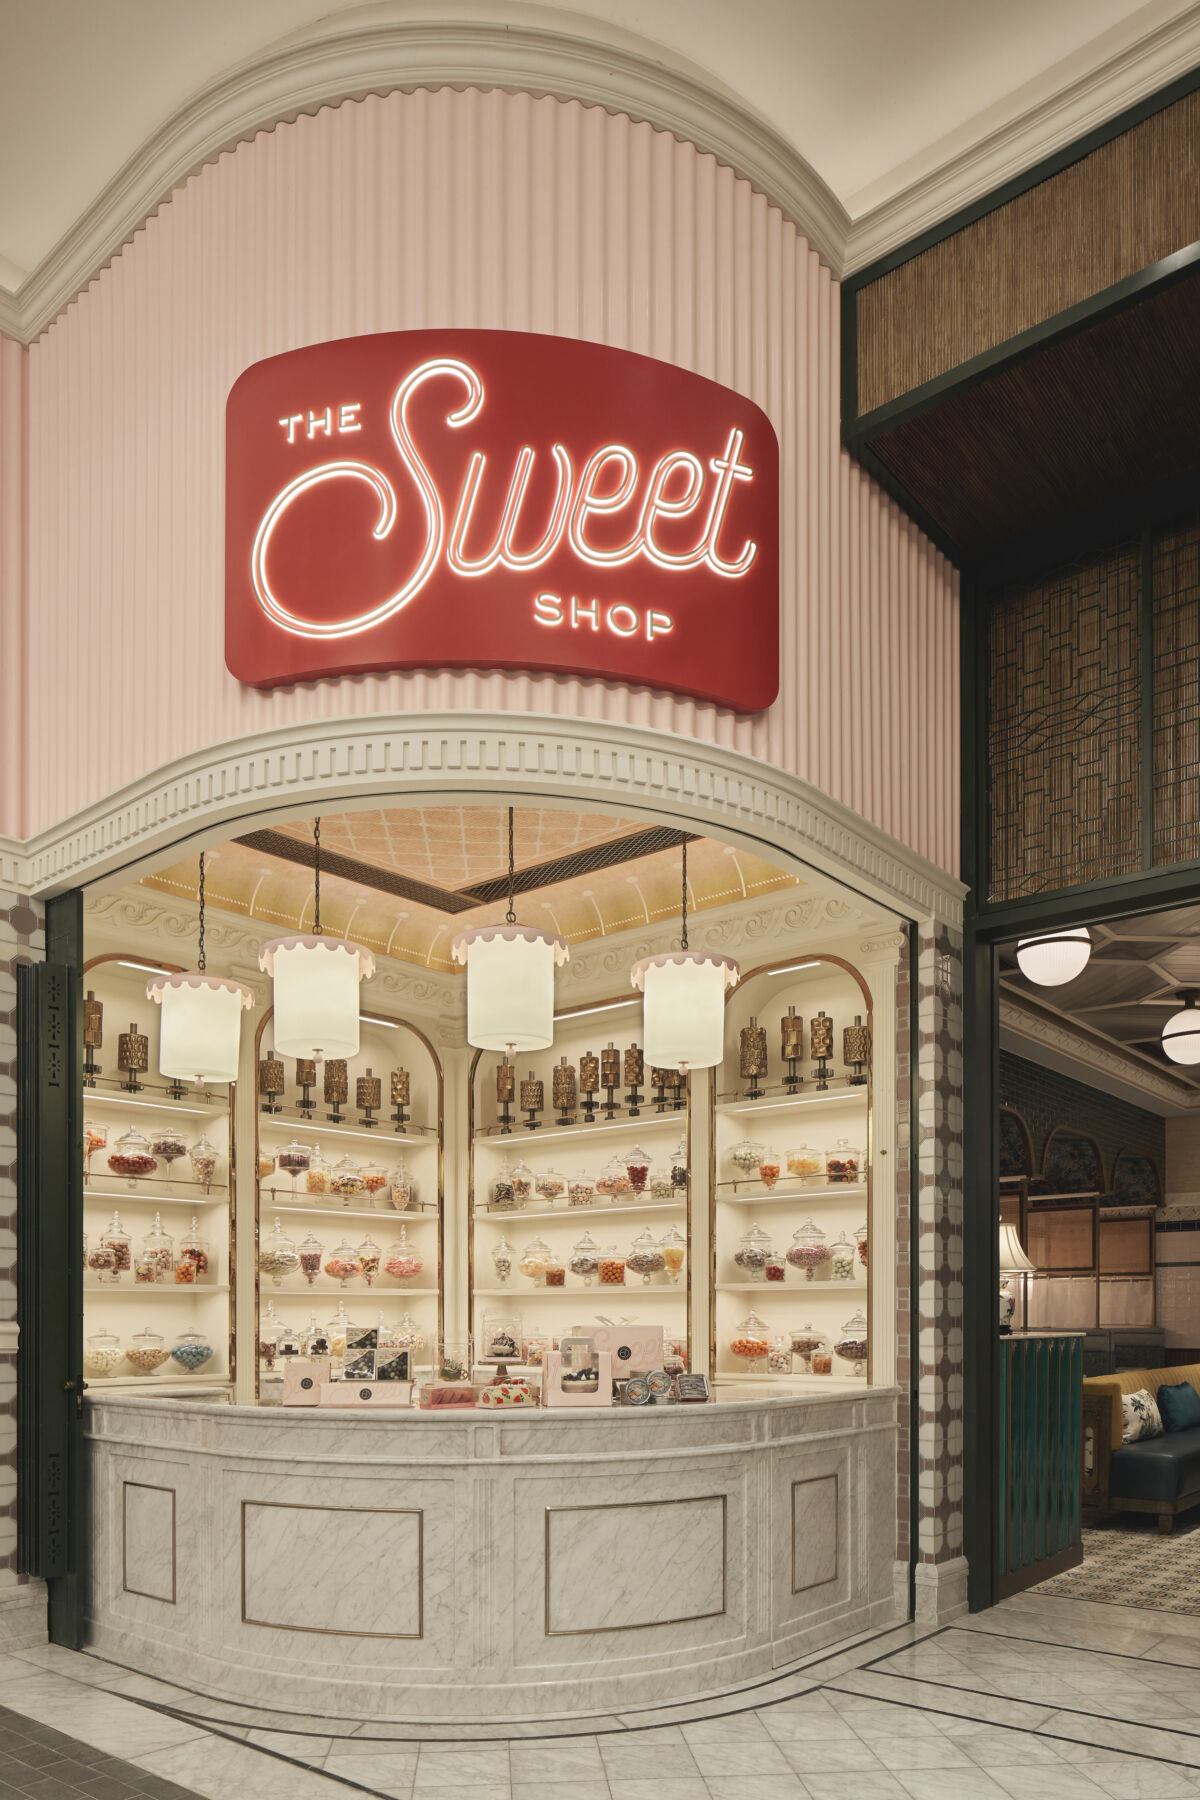 The Sweet Shop at The Conservatory